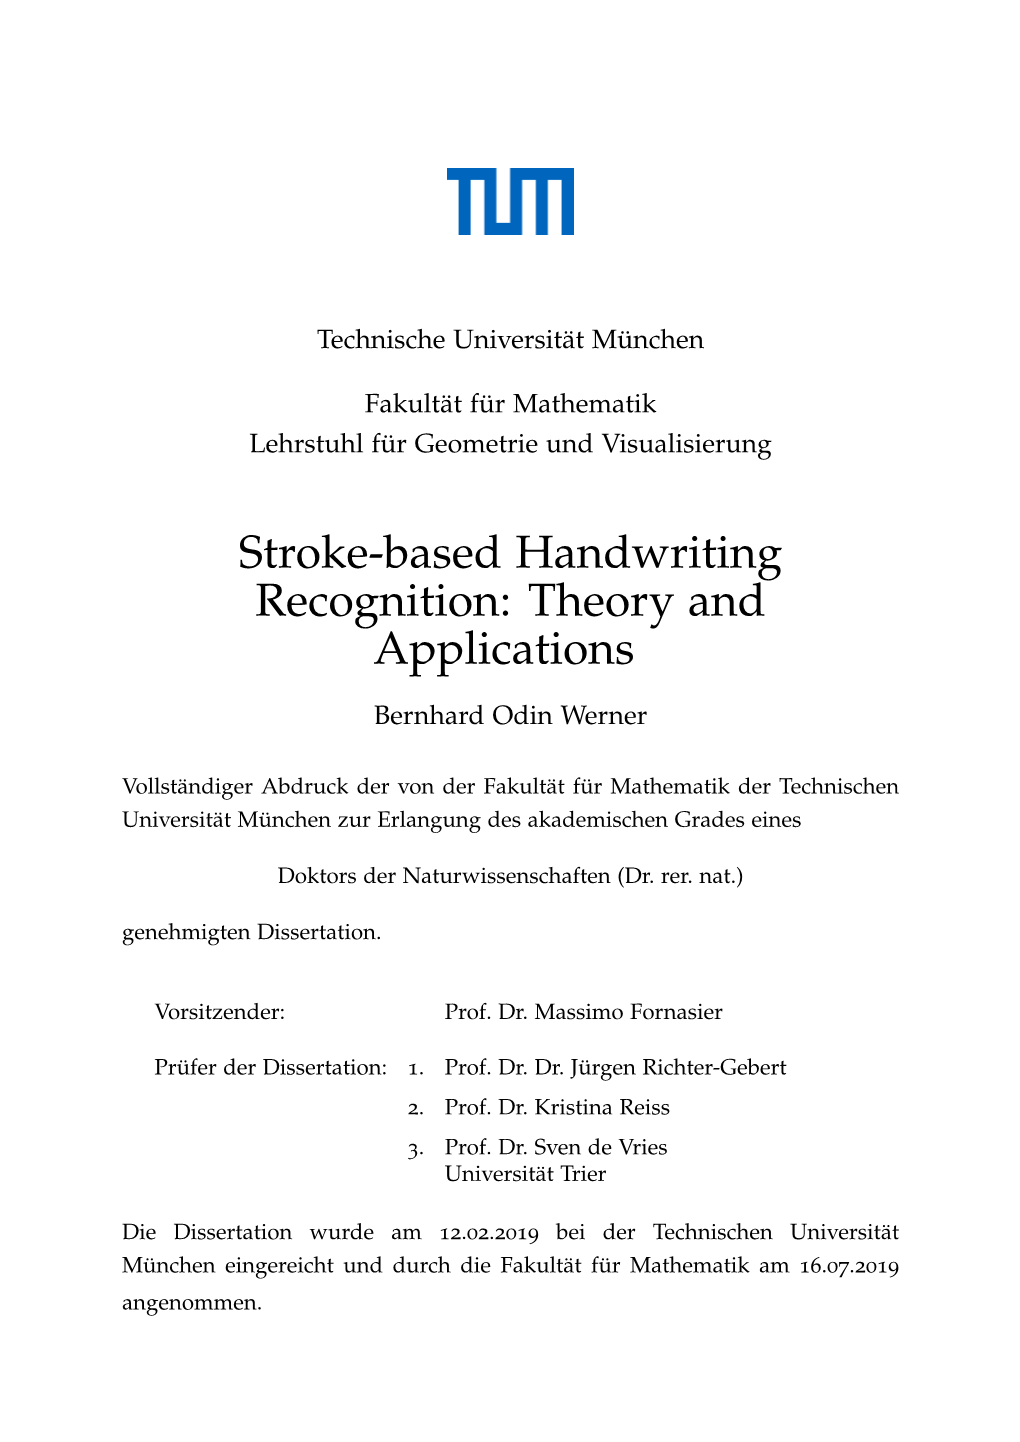 Stroke-Based Handwriting Recognition: Theory and Applications